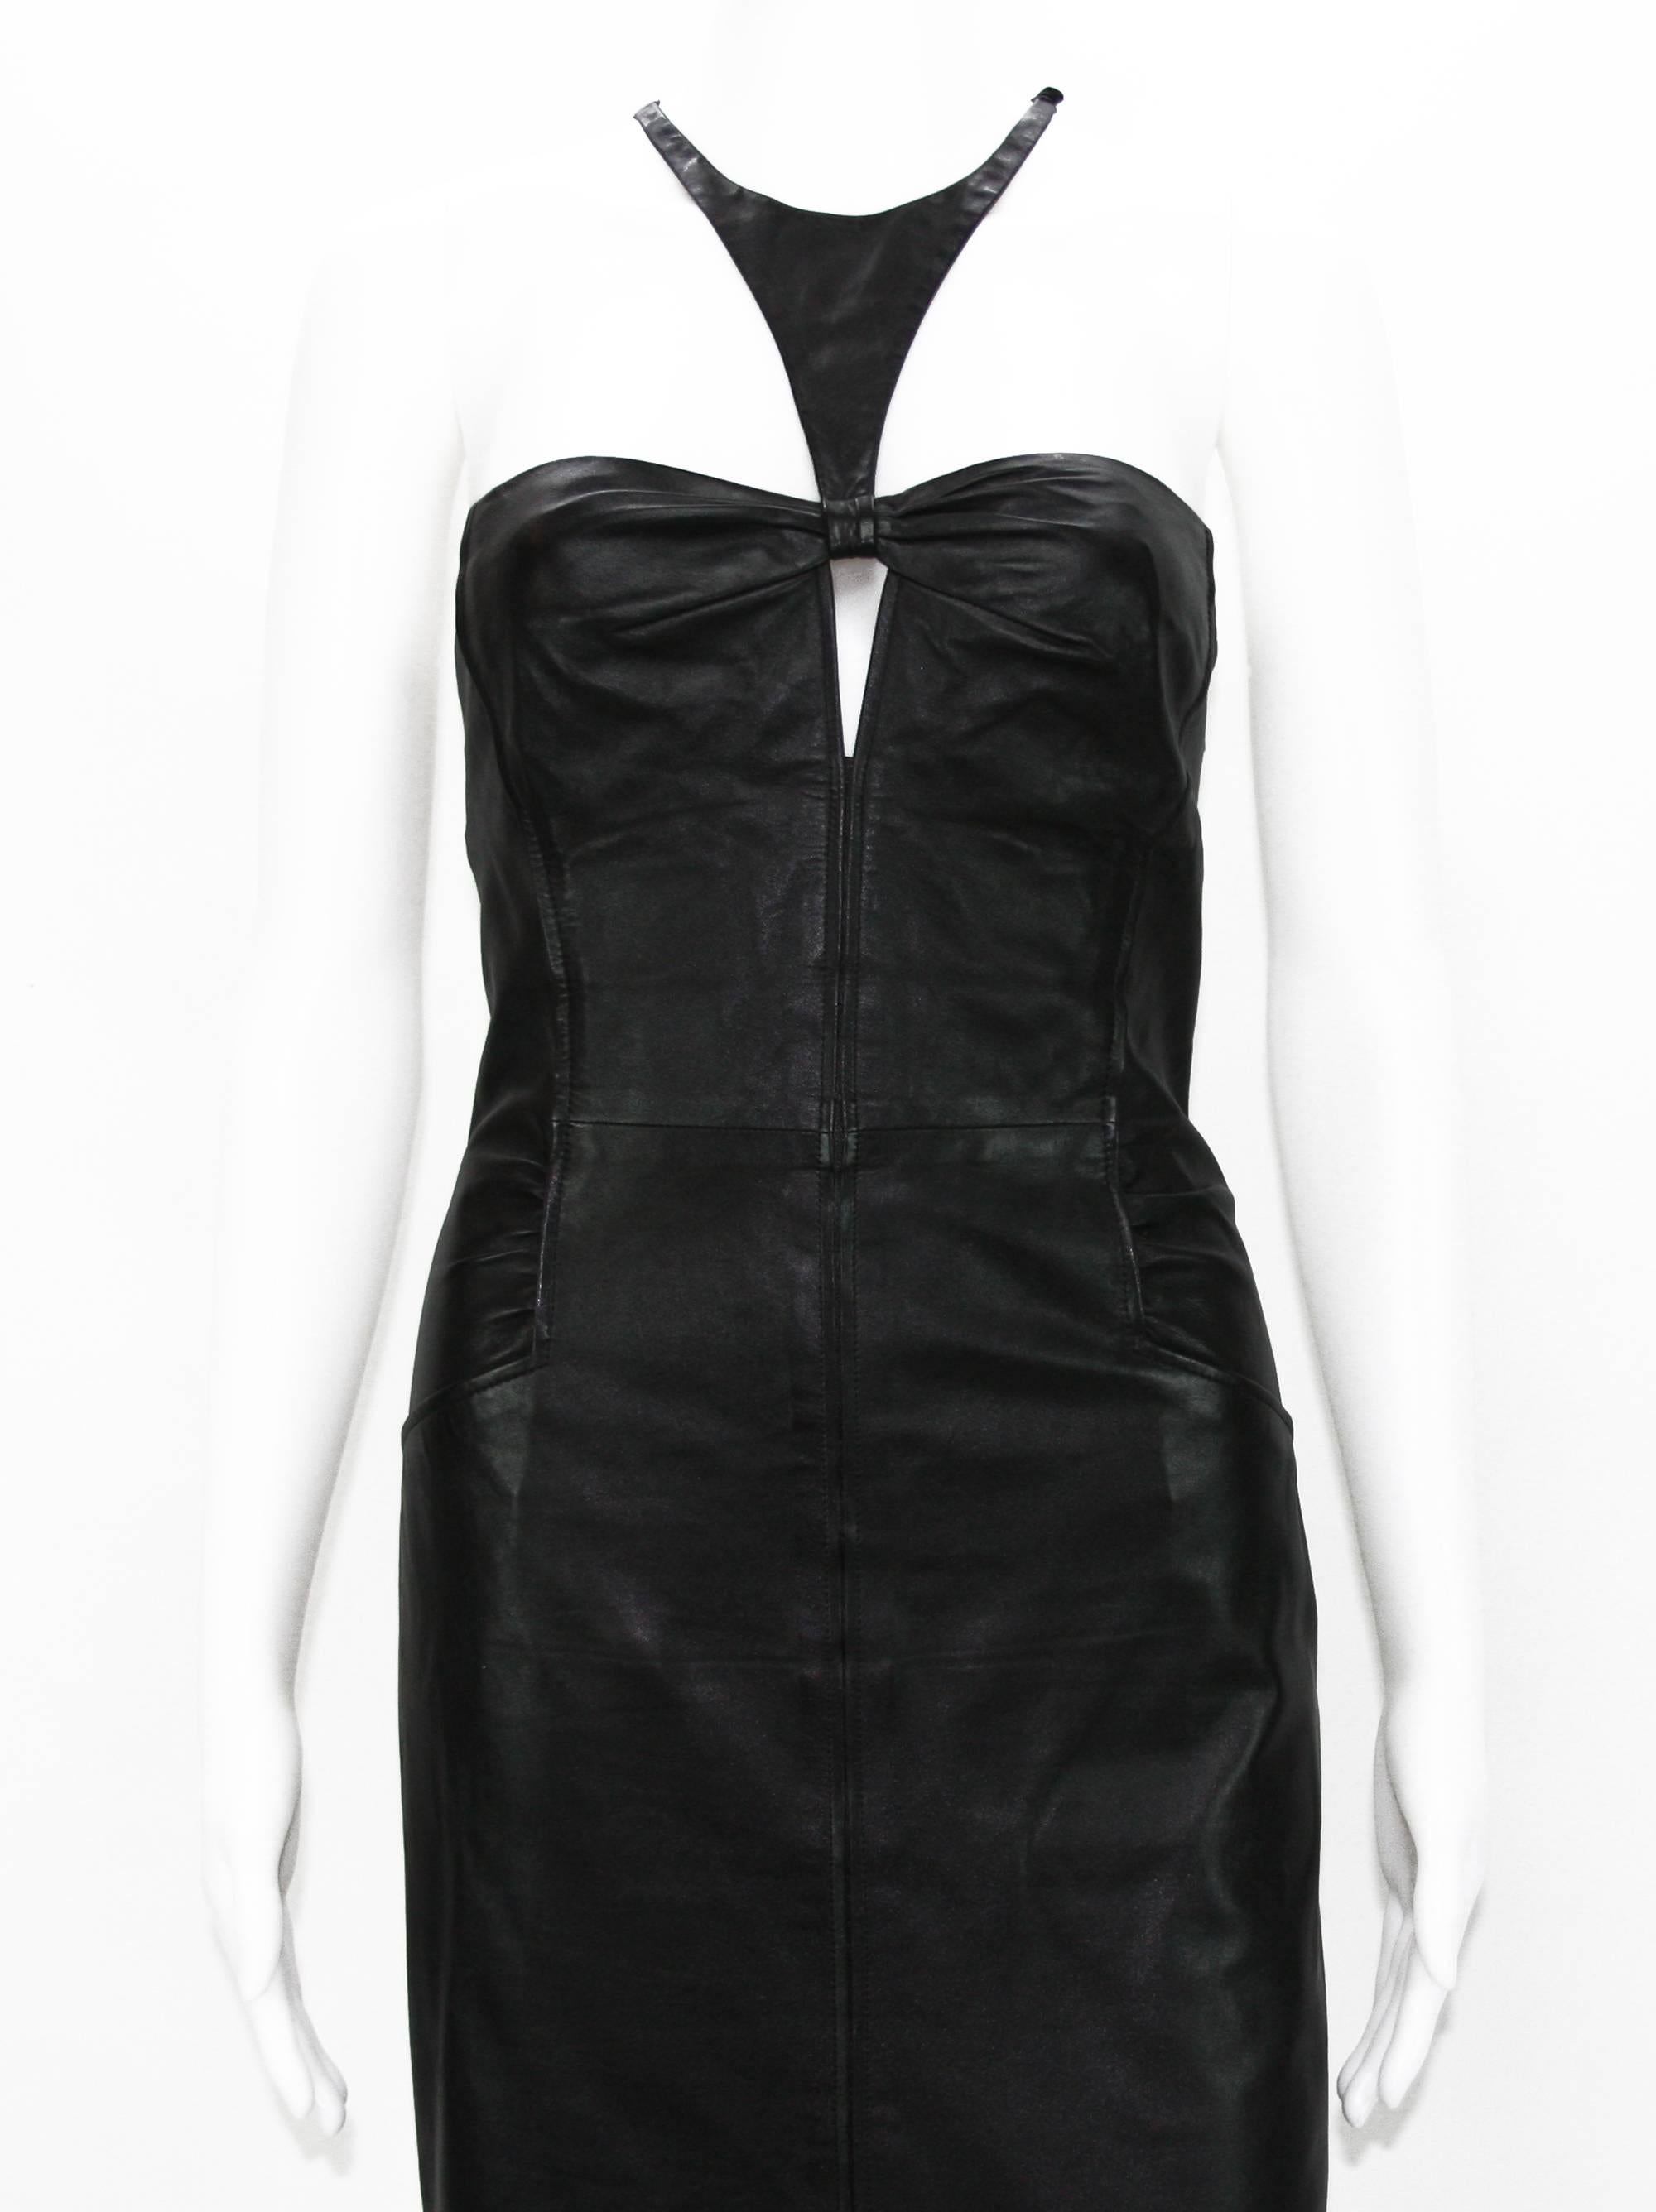 Tom Ford for Gucci 2004 Collection Black Leather Cocktail Dress 44 5